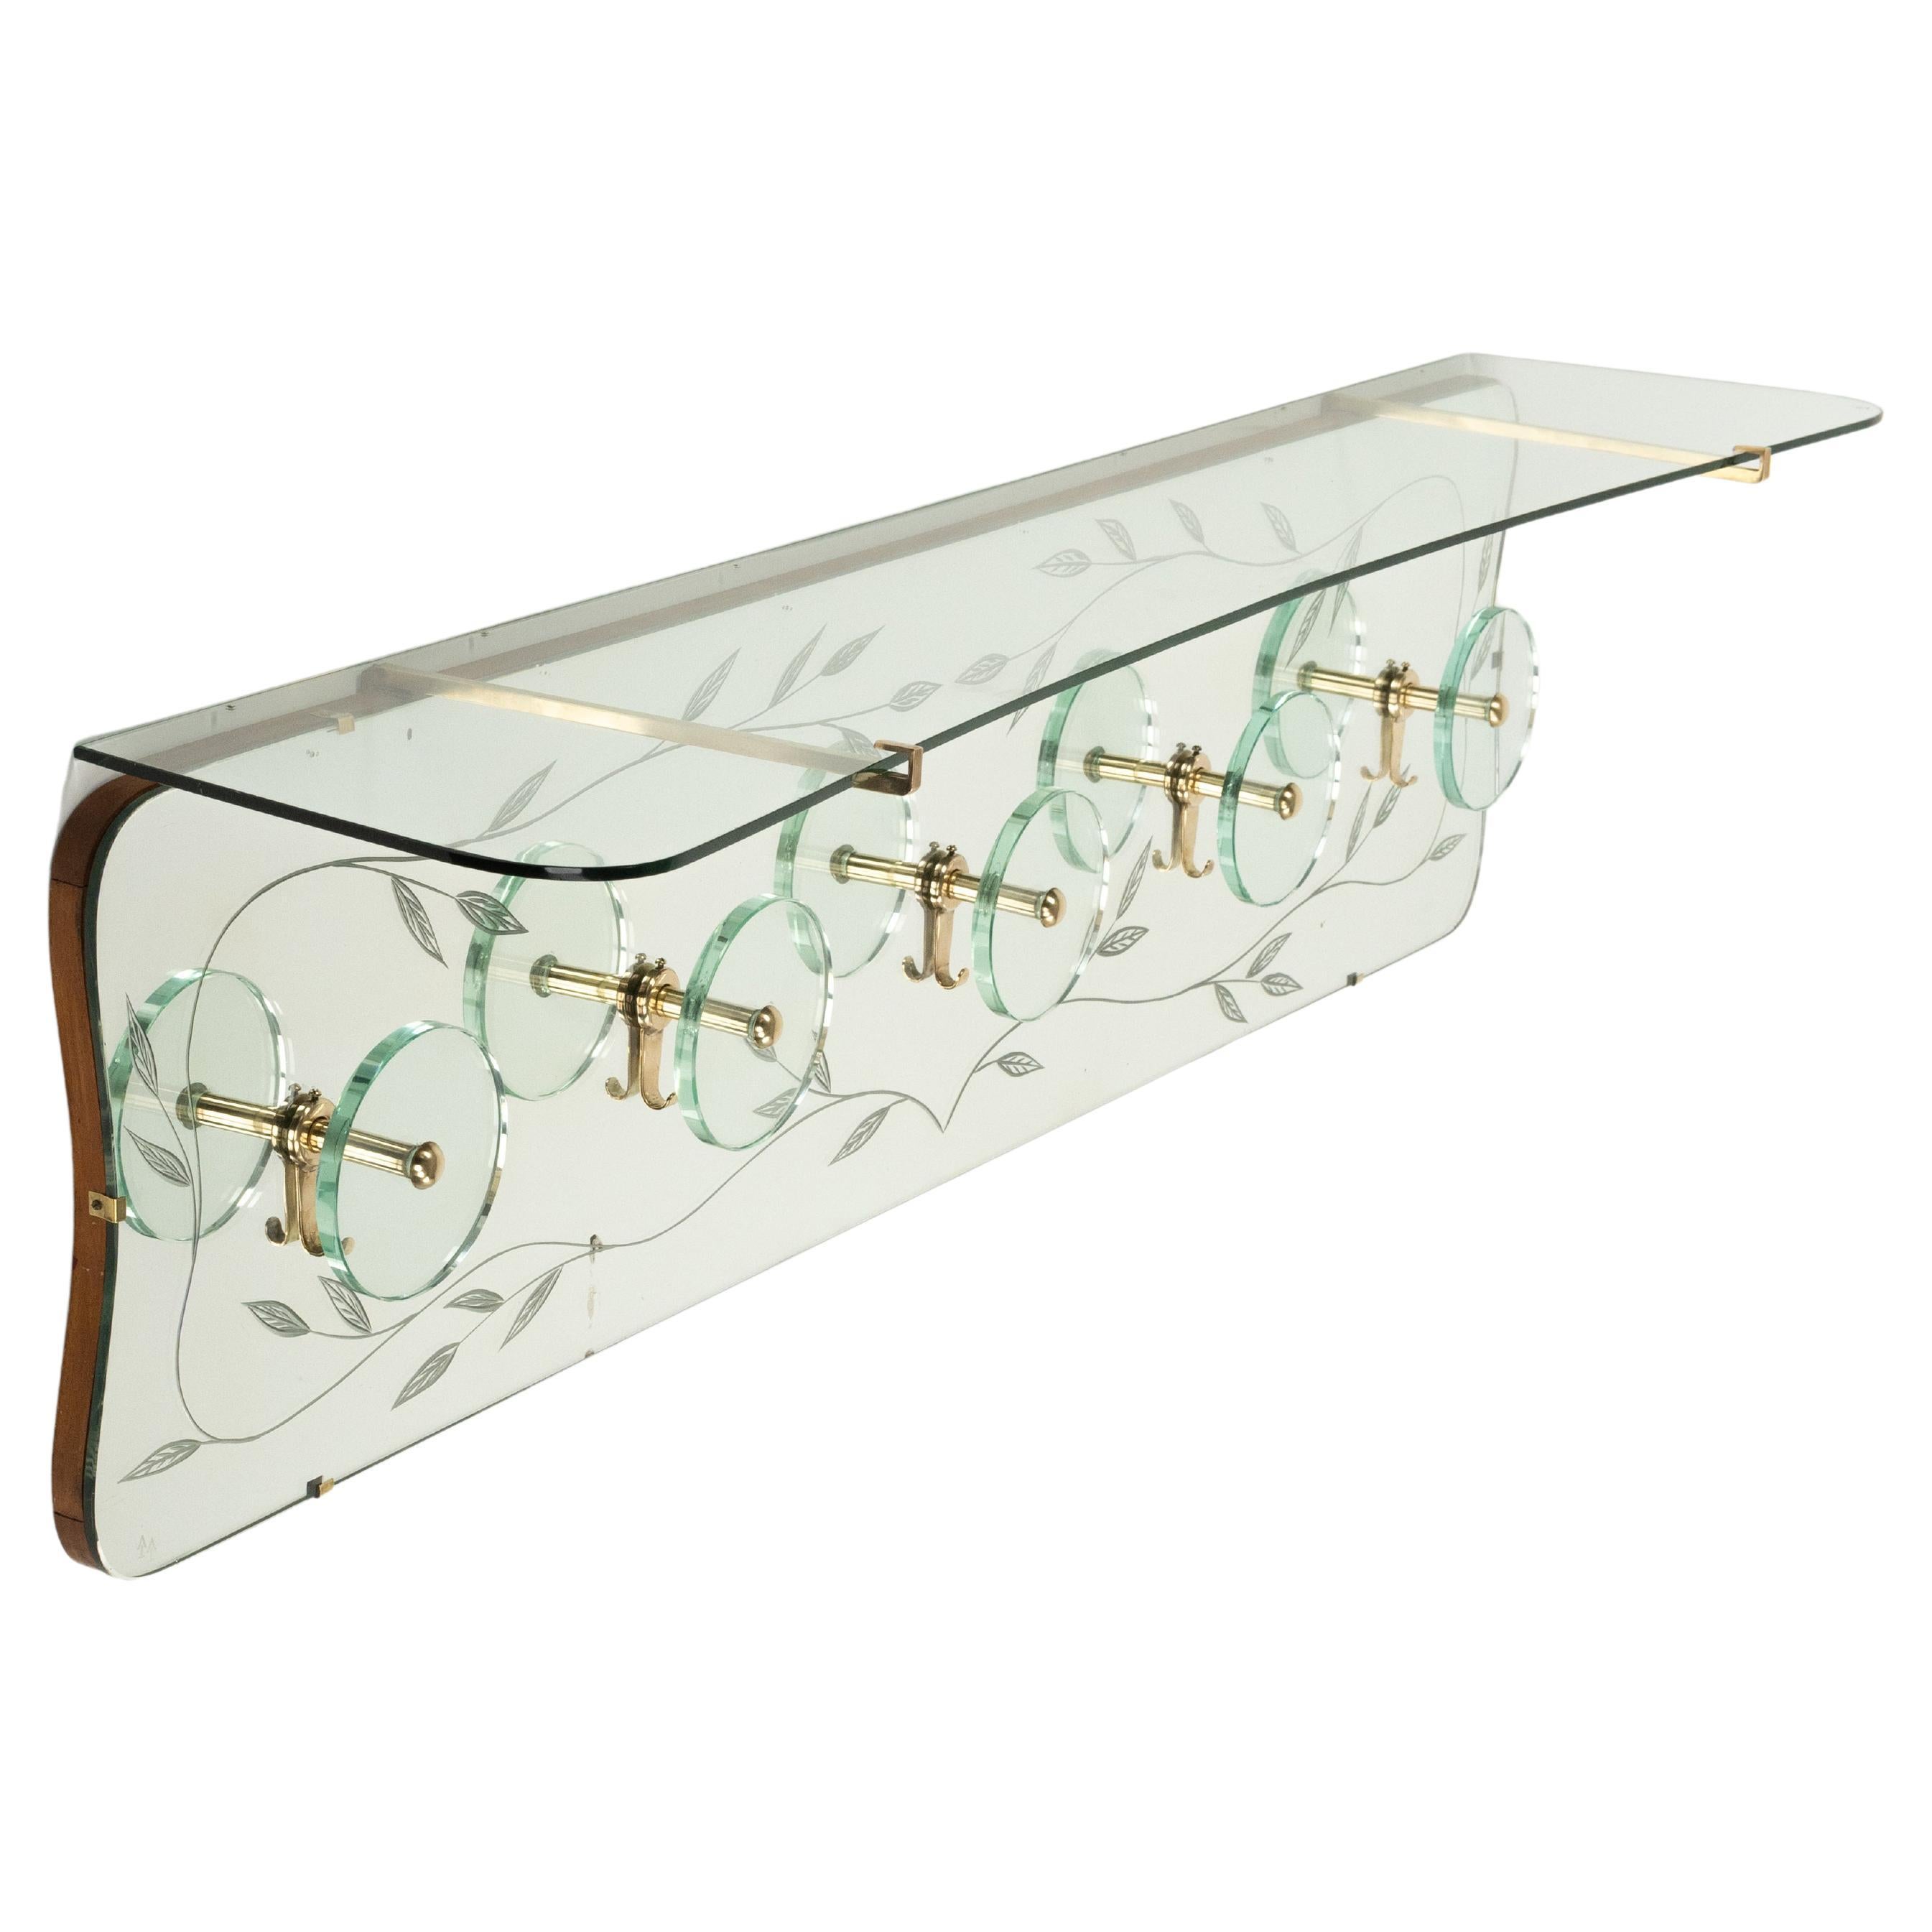 Midcentury Coat Rack Shelf in Mirror, Brass & Glass by Cristal Art, Italy, 1950s For Sale